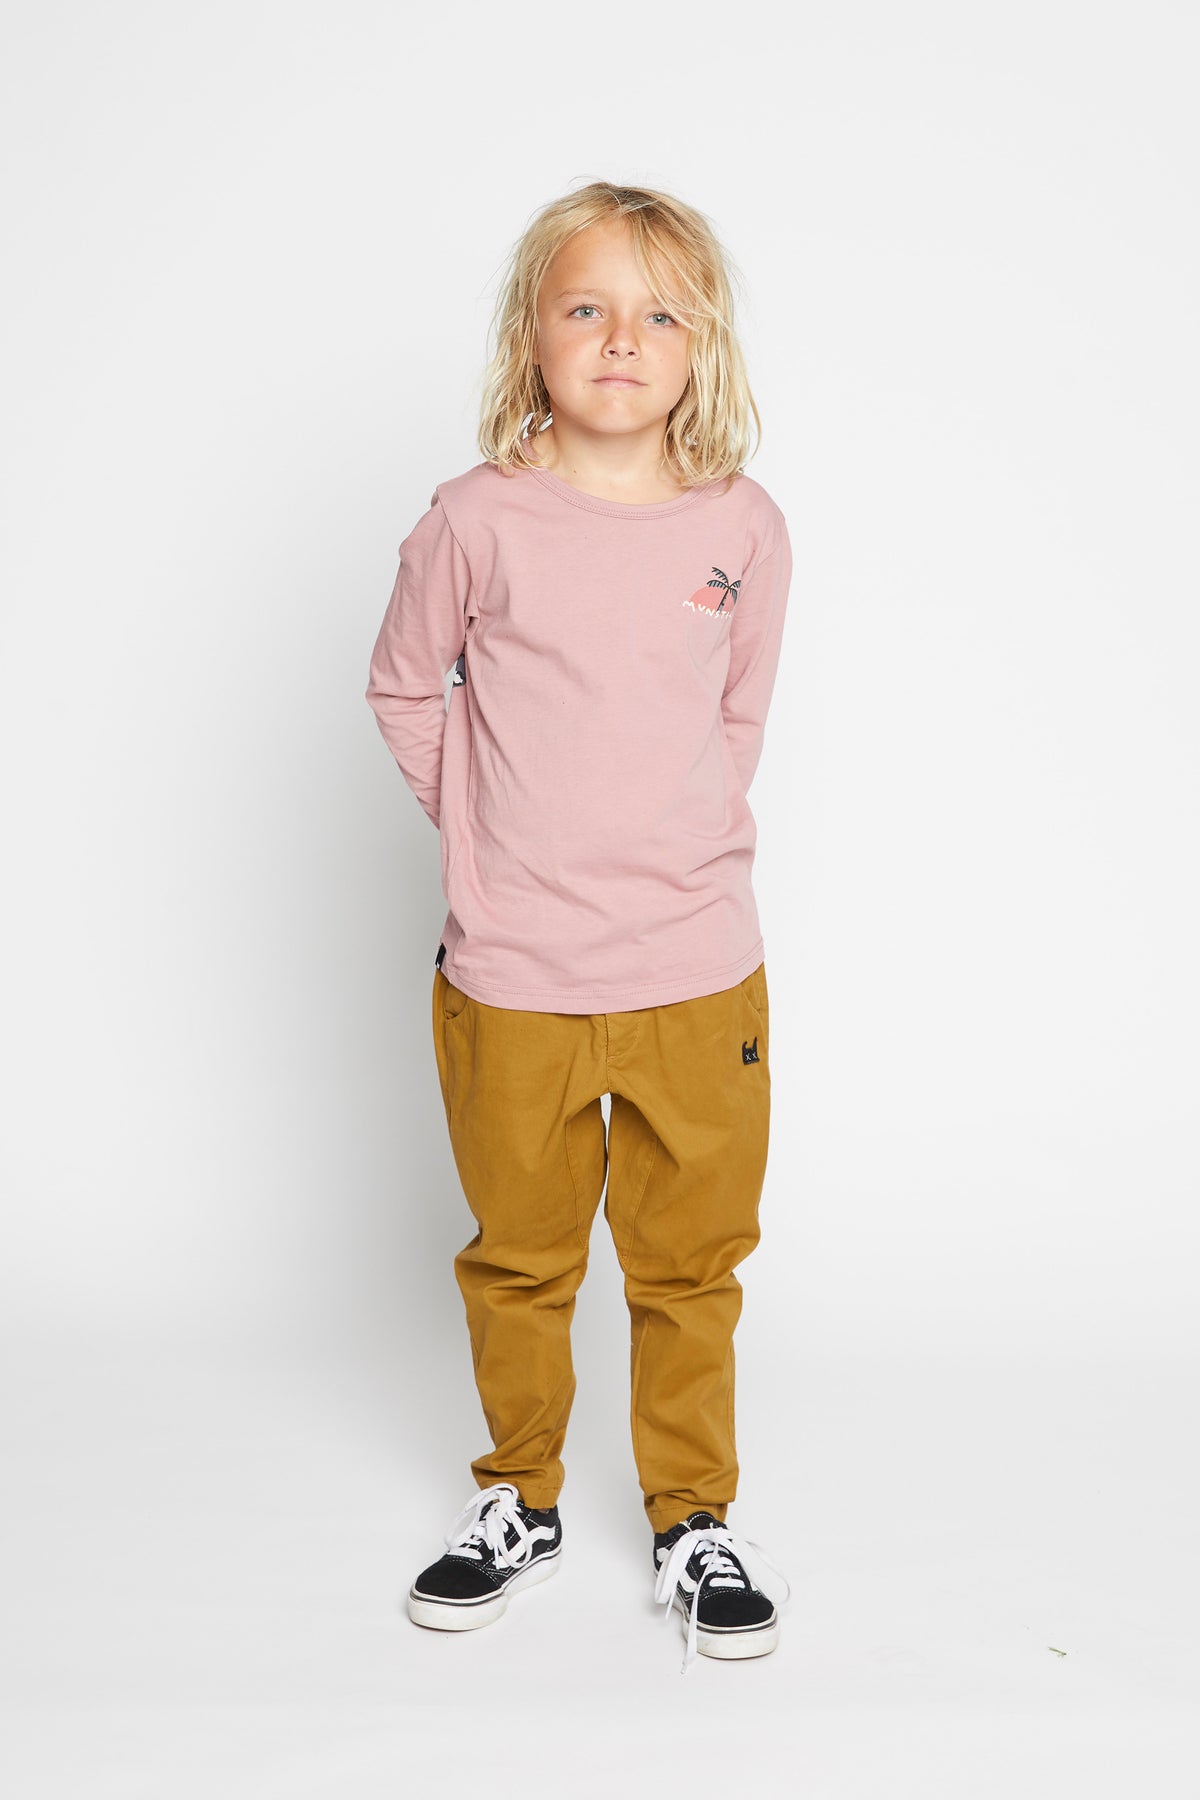 Munster Kids - Stormy L/S Tee in Dusty Pink no